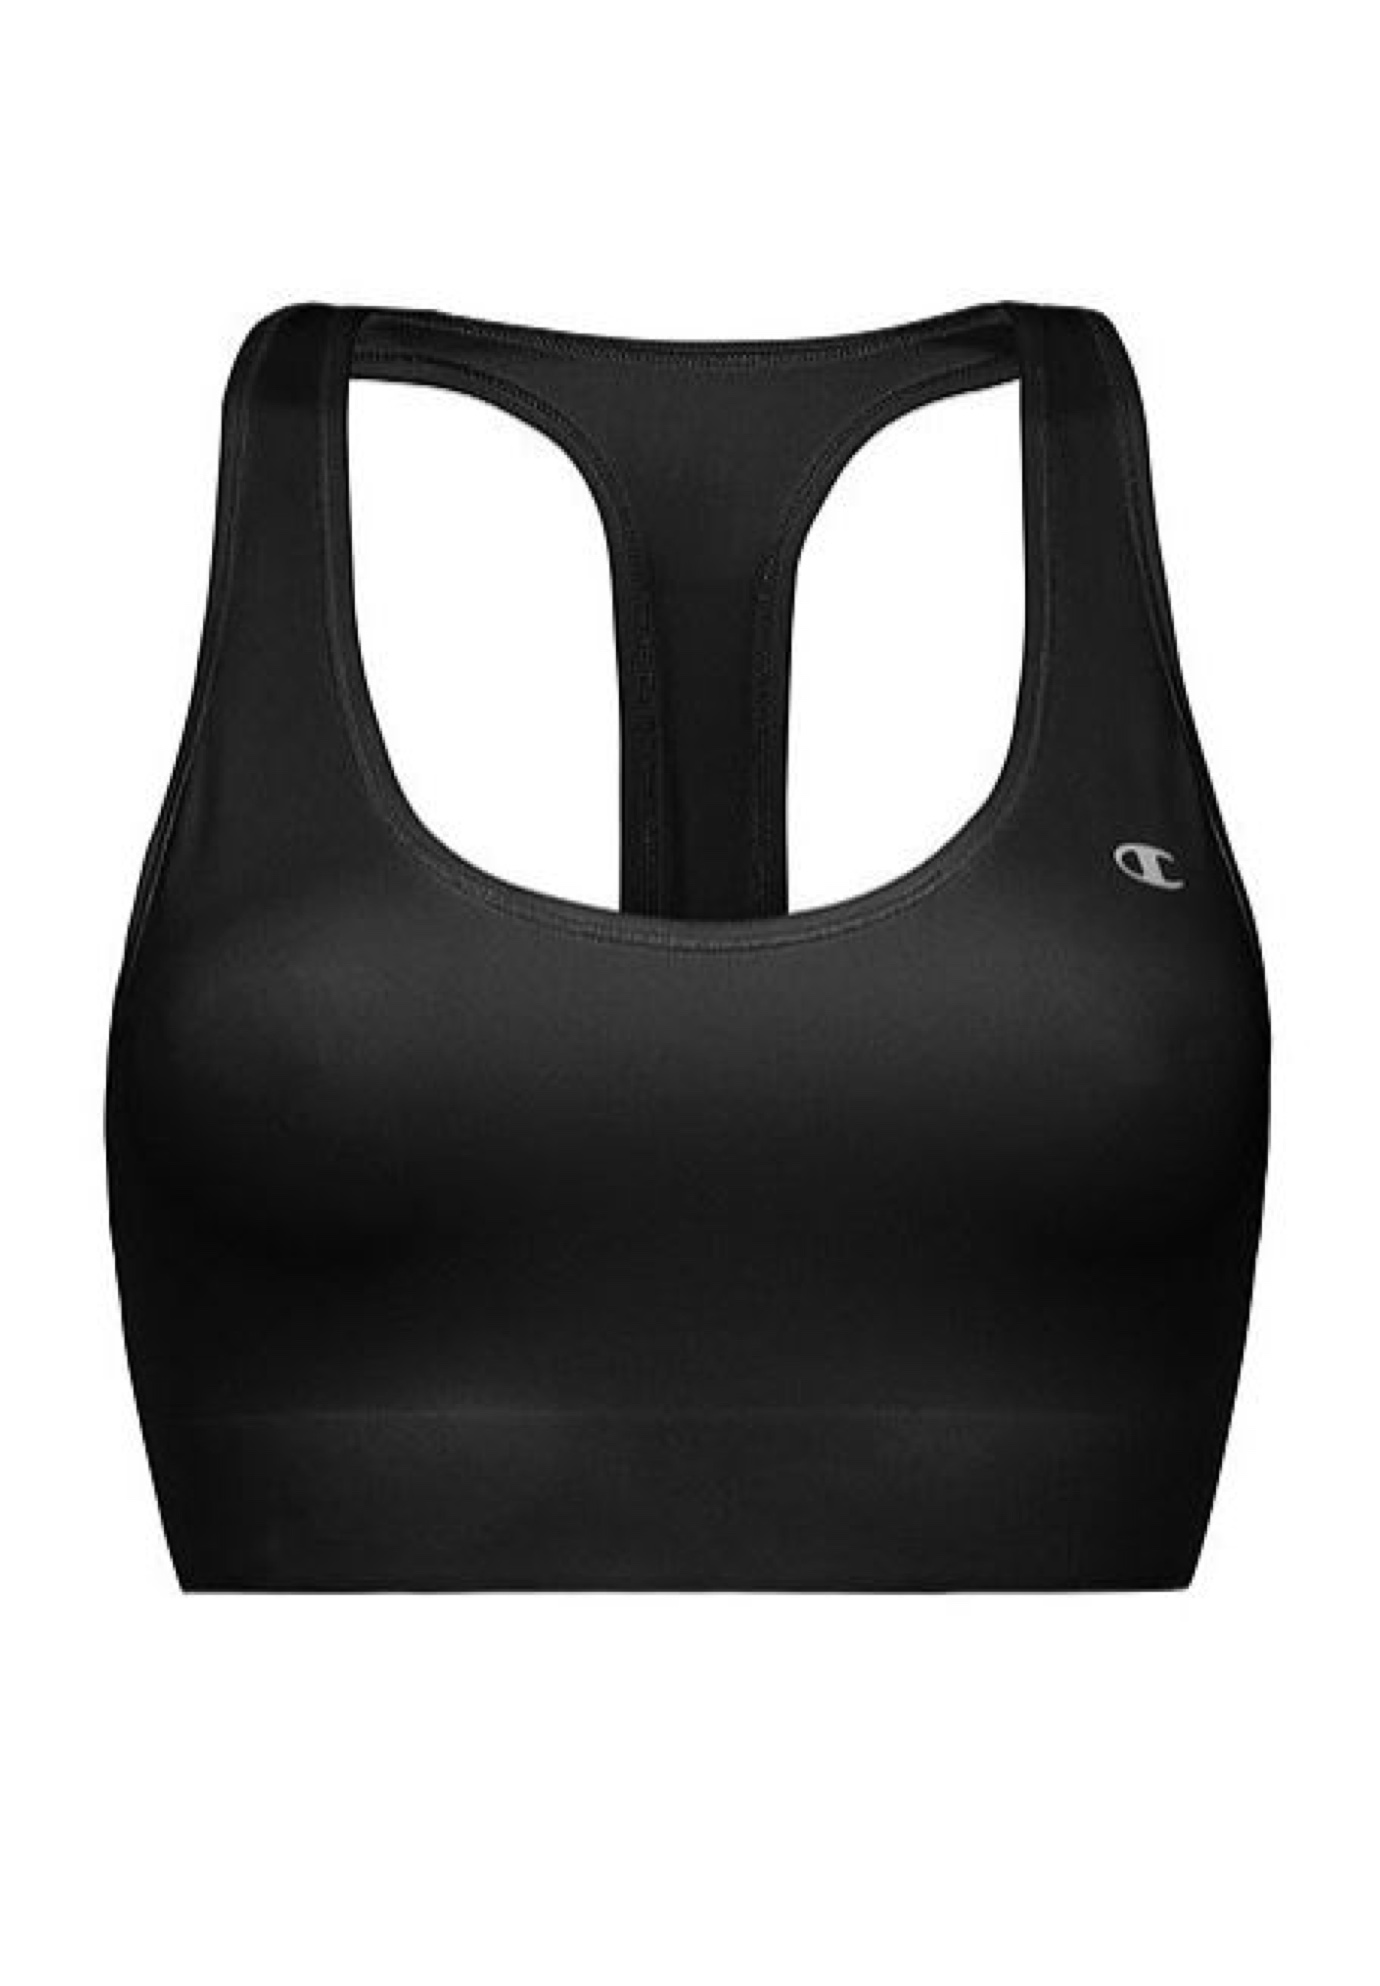 The Absolute Workout Sports Bra, 